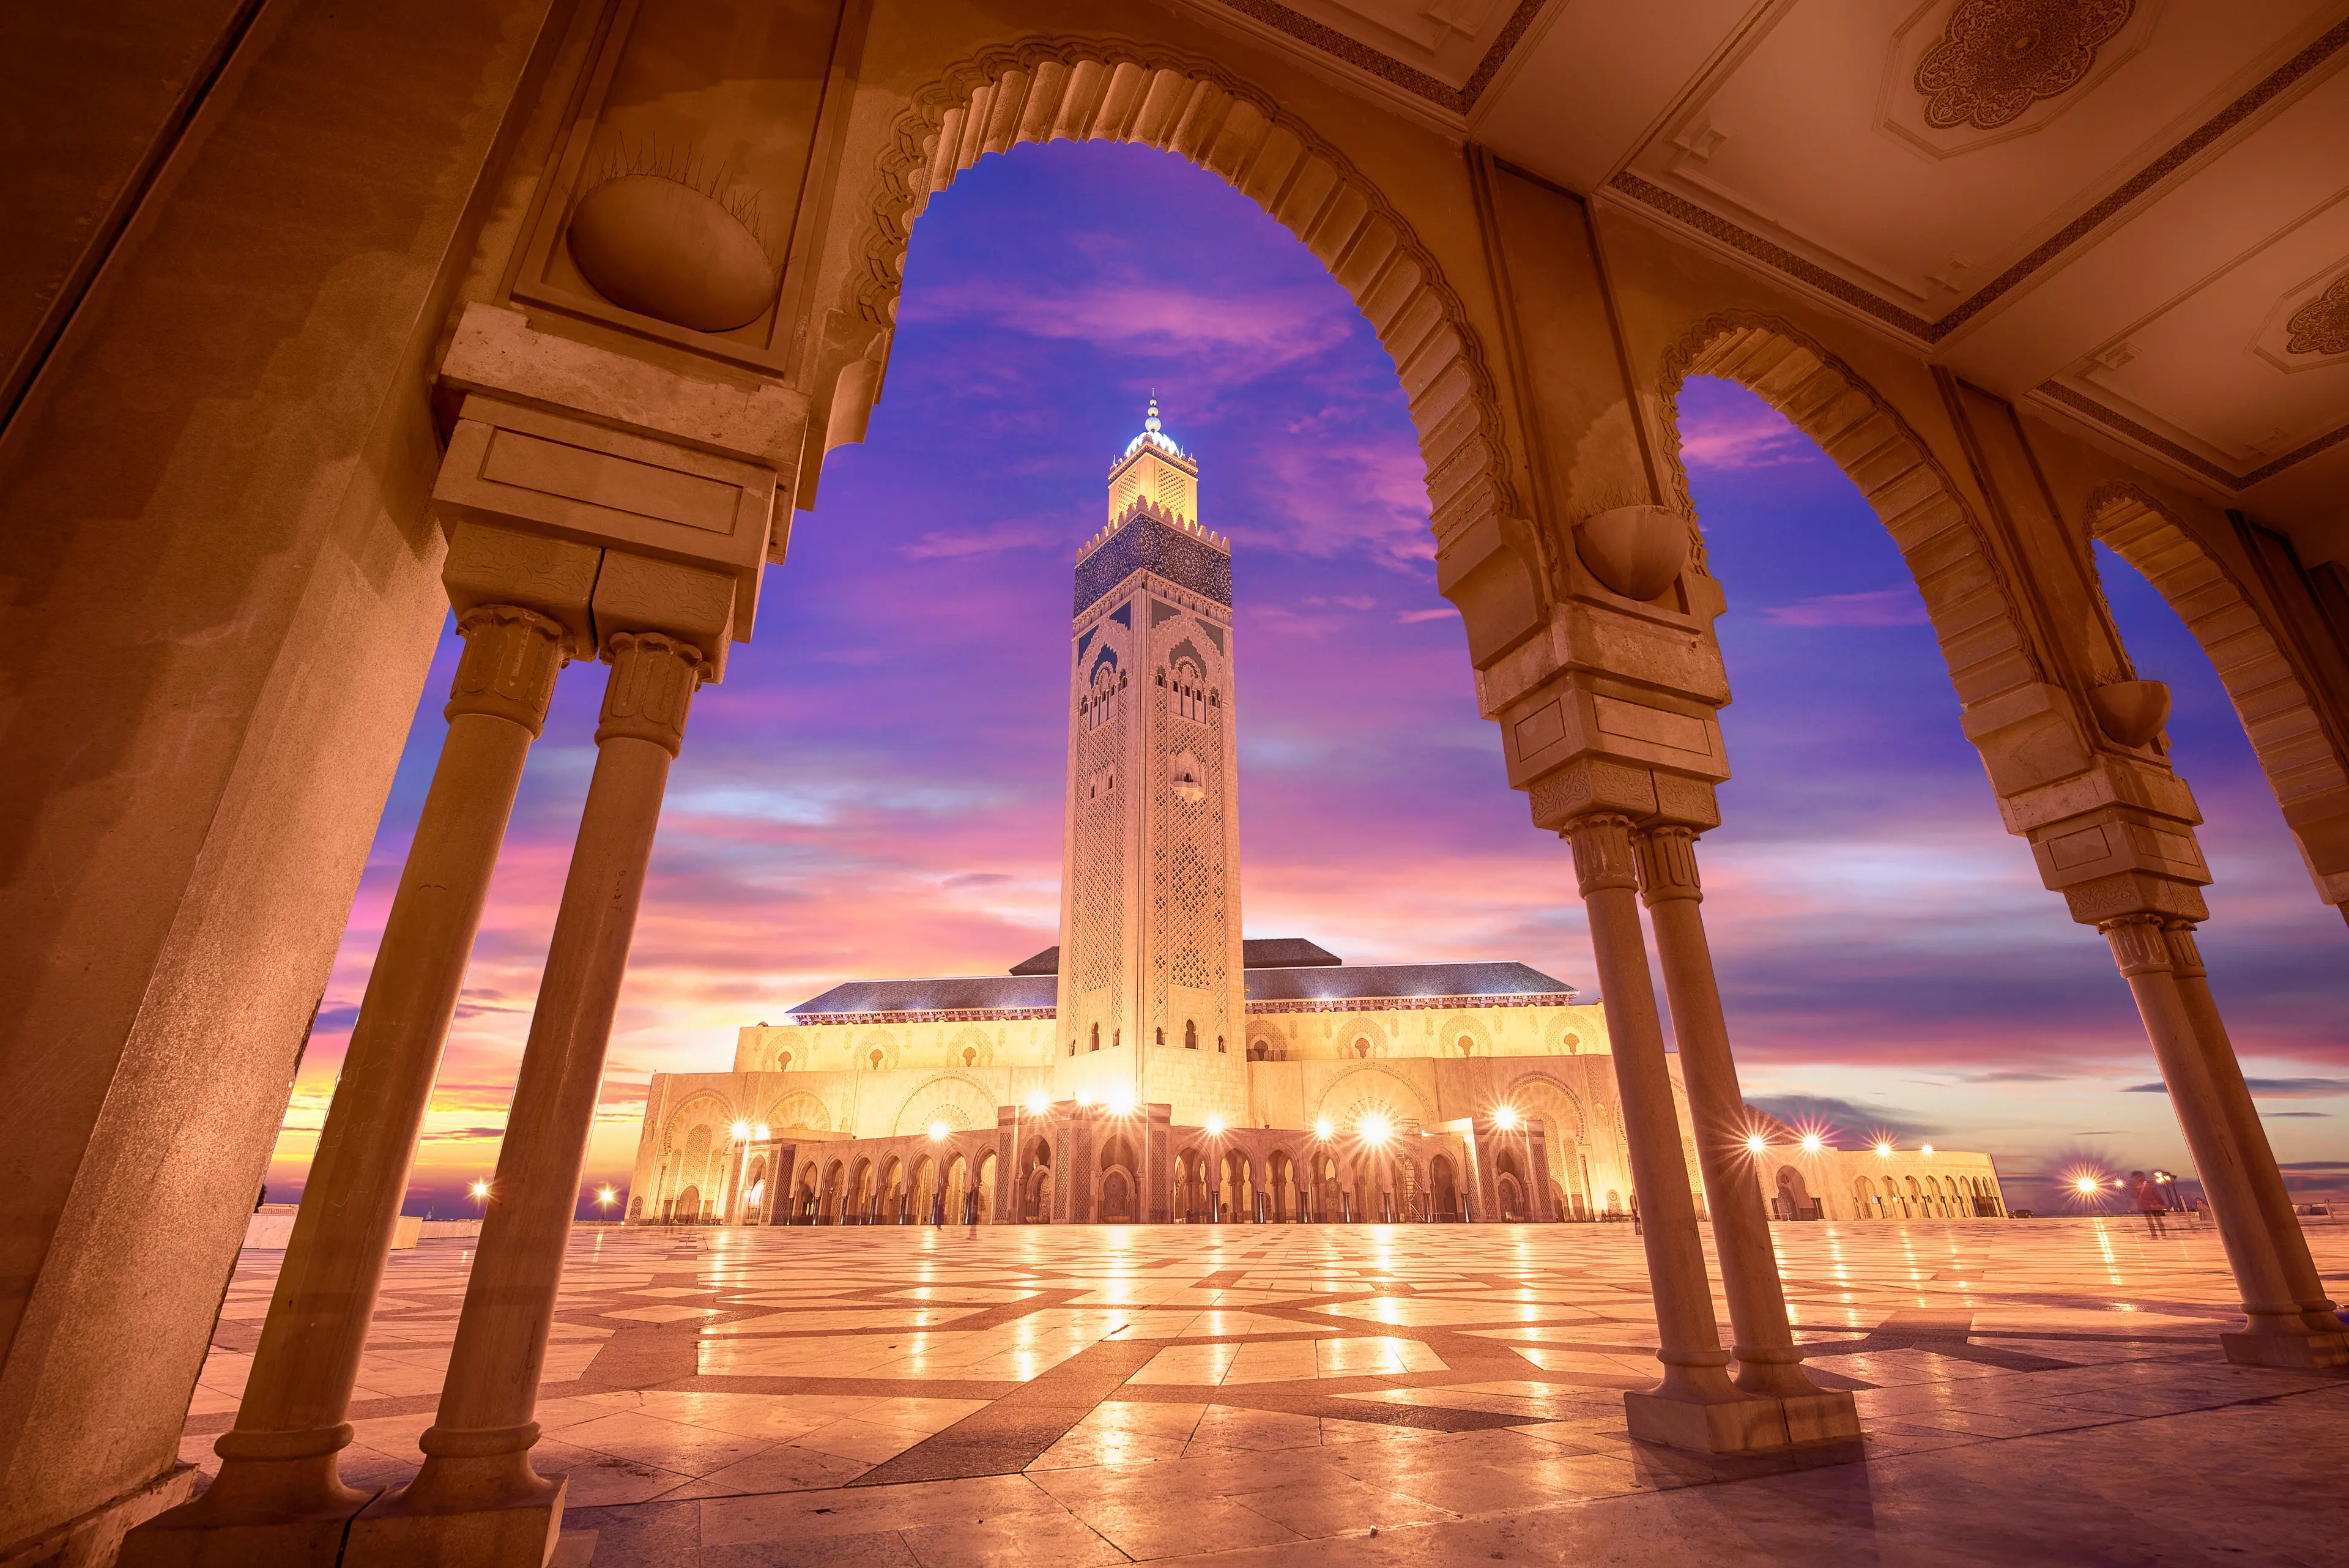 Hassan II mosque at sunset